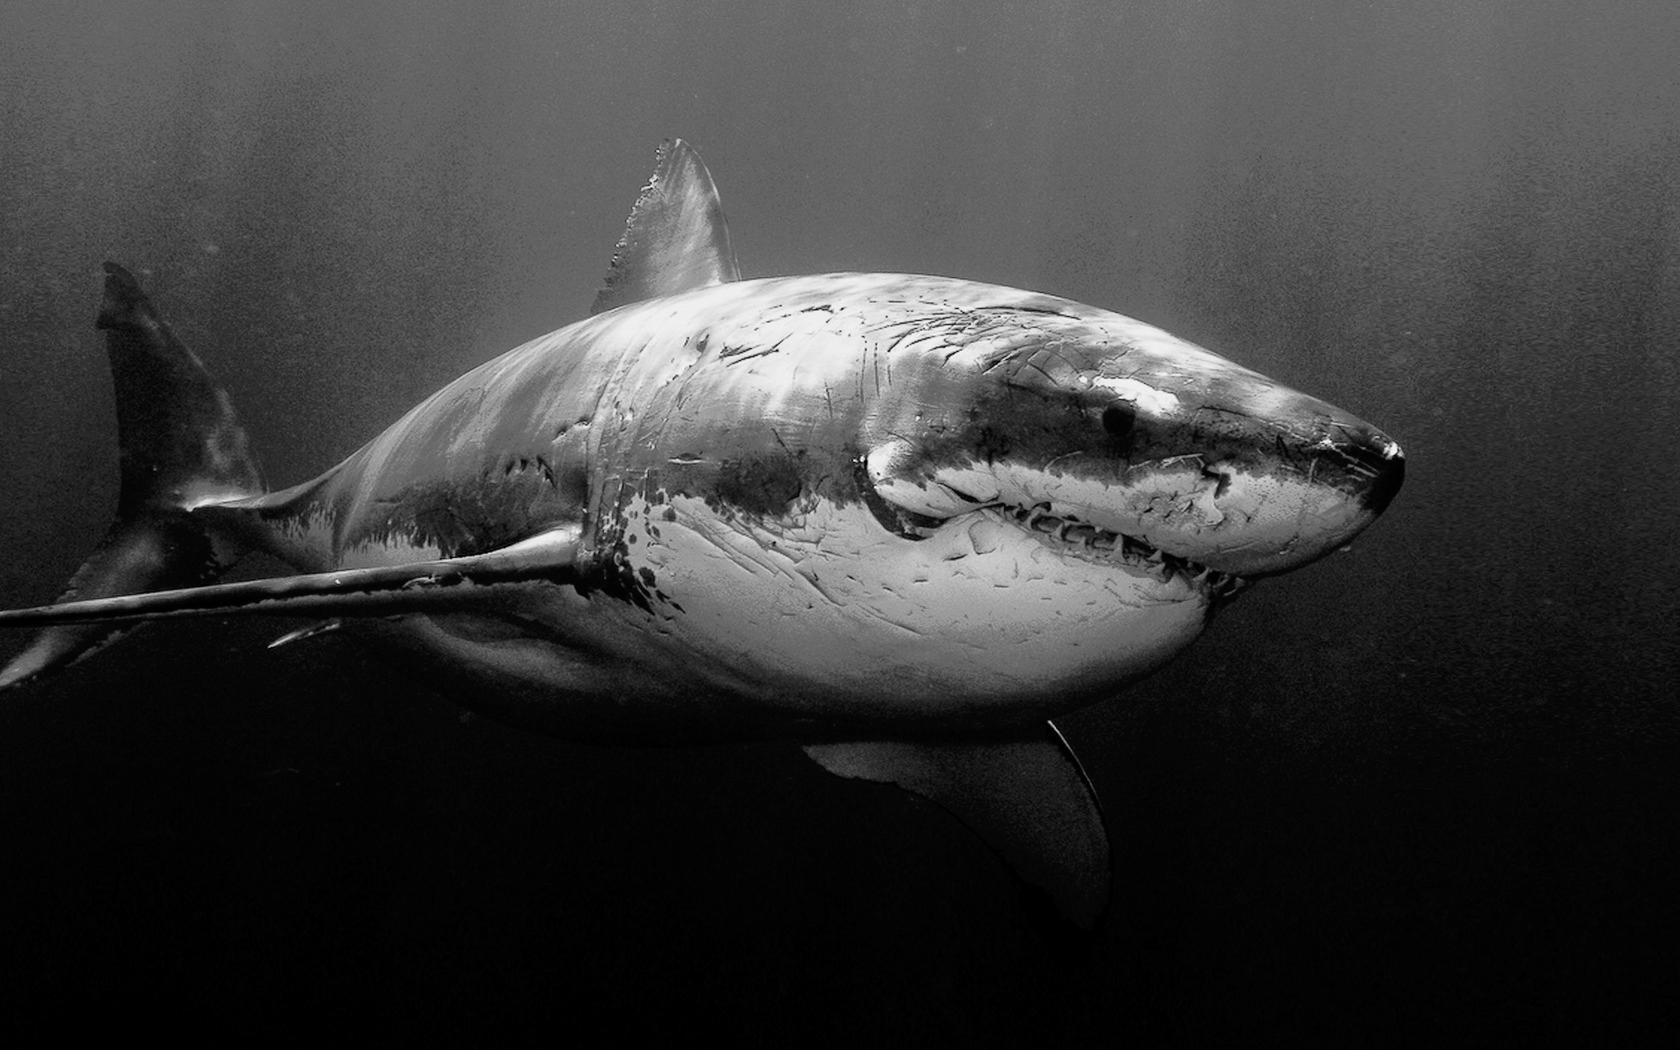 White Animals Sharks Grayscale Underwater Iphone wallpaper | colorful |  Wallpaper Better